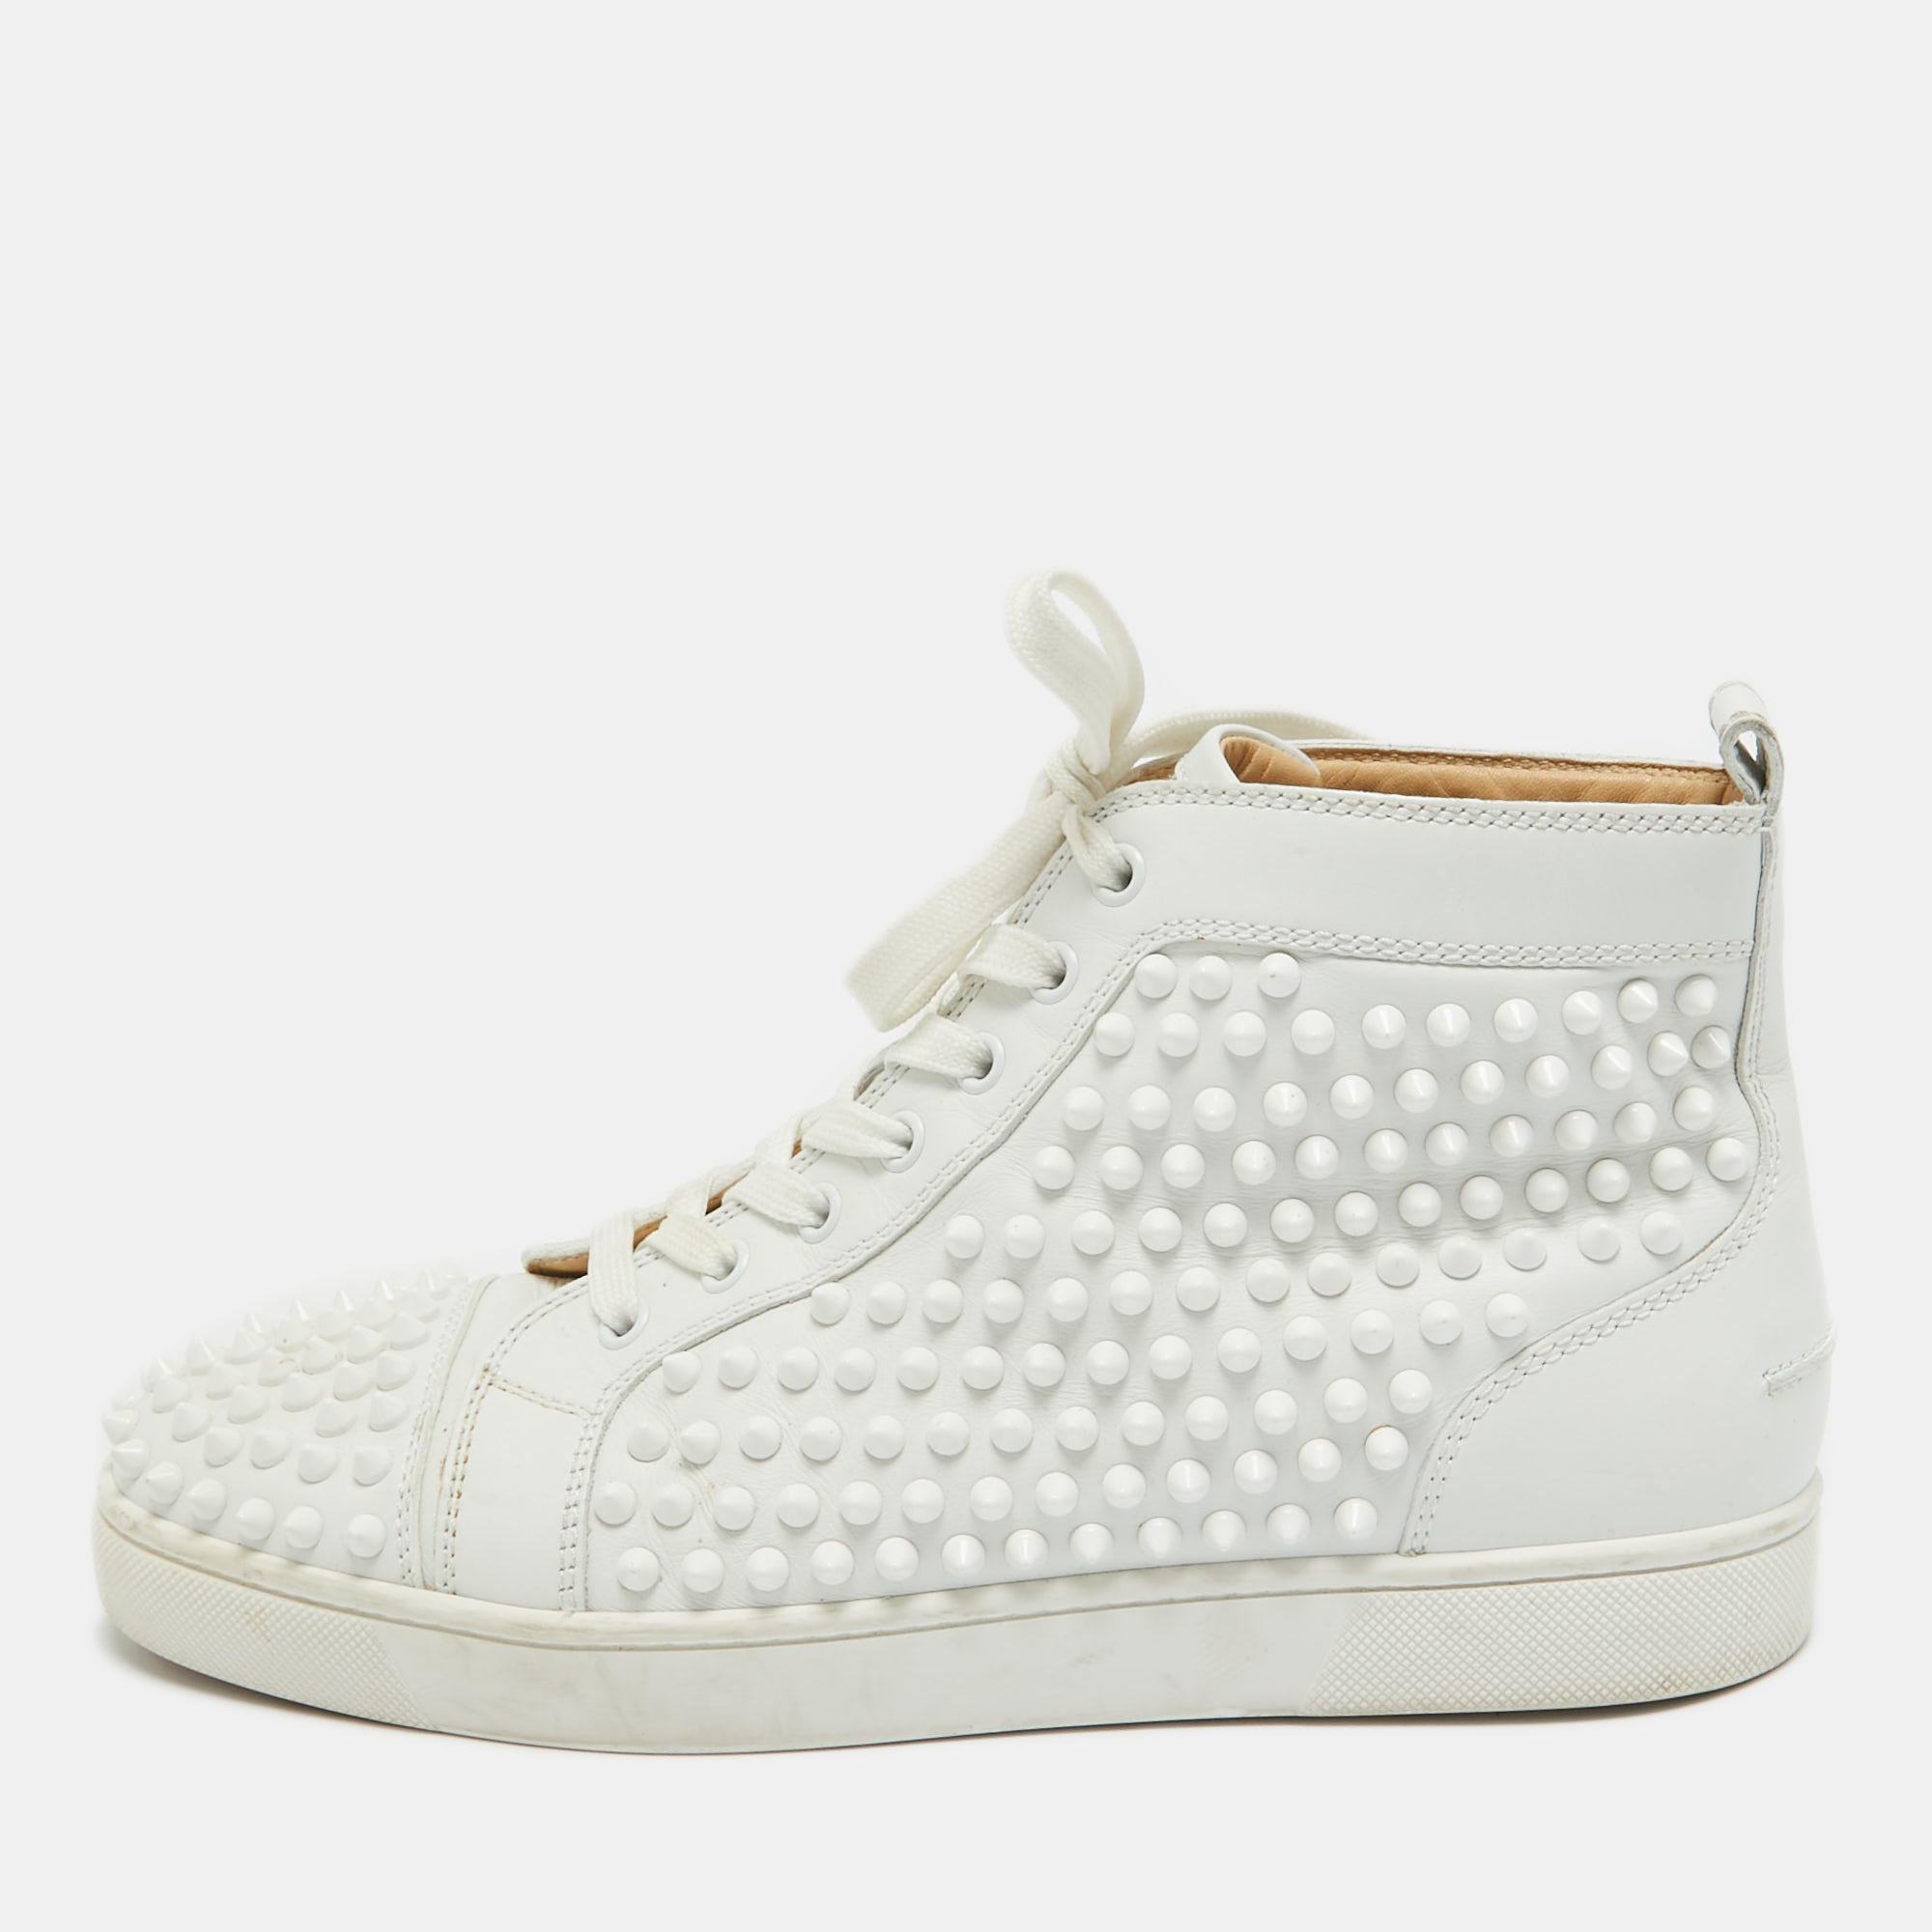 Feel great in your casual wear every time you step out in these sneakers from Christian Louboutin. They have been crafted from leather and styled as a high top with an exterior detailed with spikes. The sneakers carry round toes lace up vamps and the signature red soles.